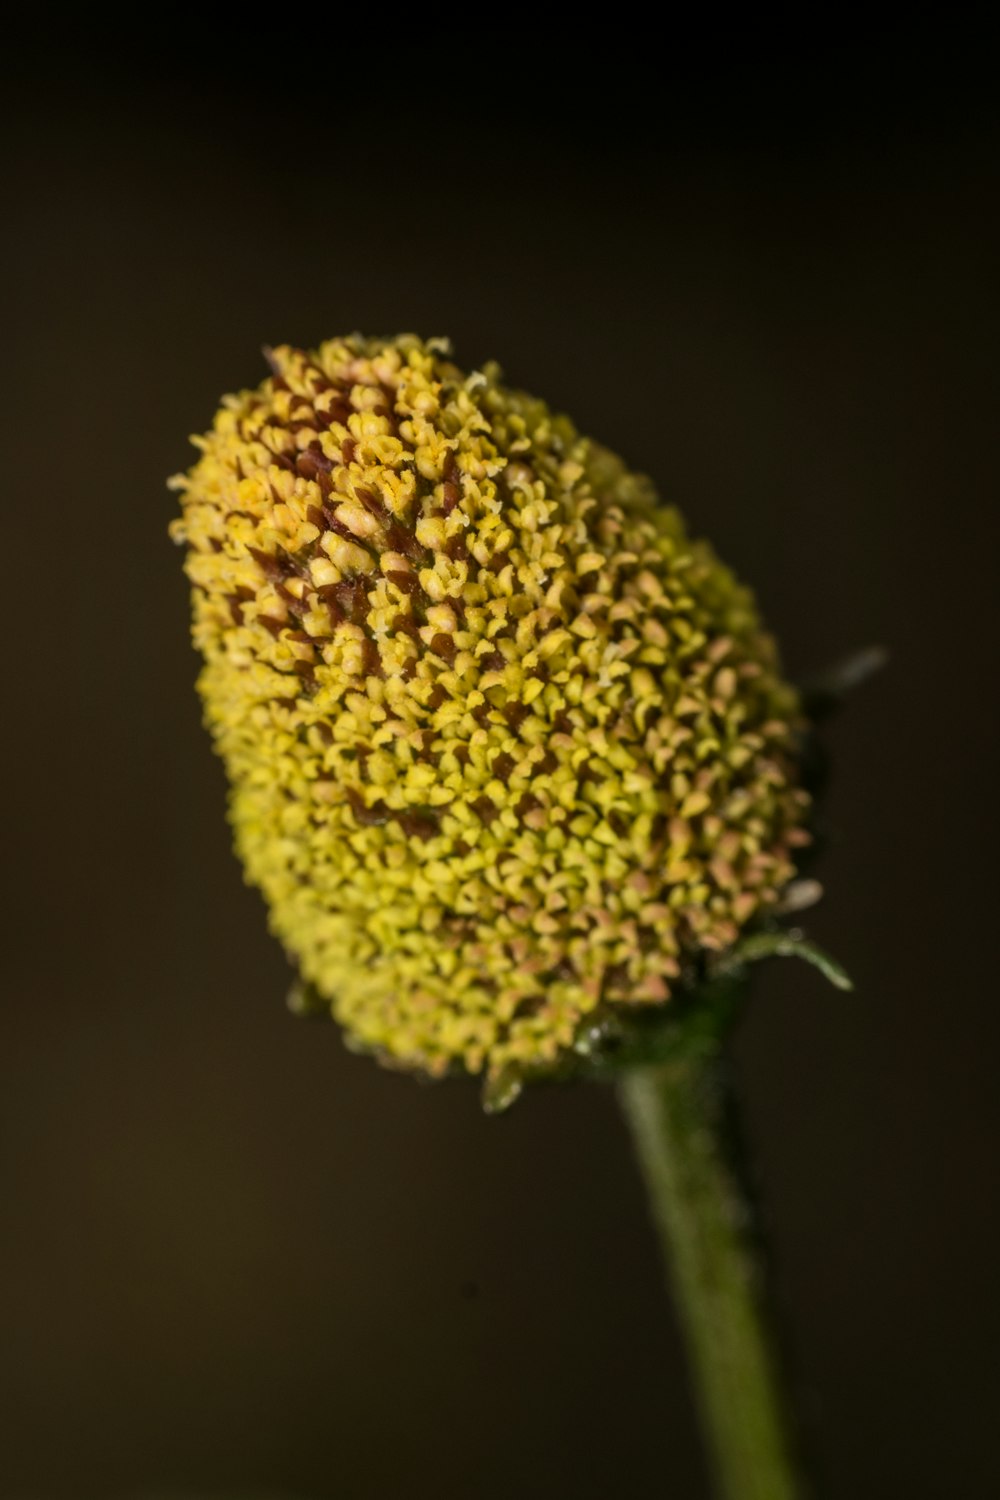 a close up of a flower with a dark background